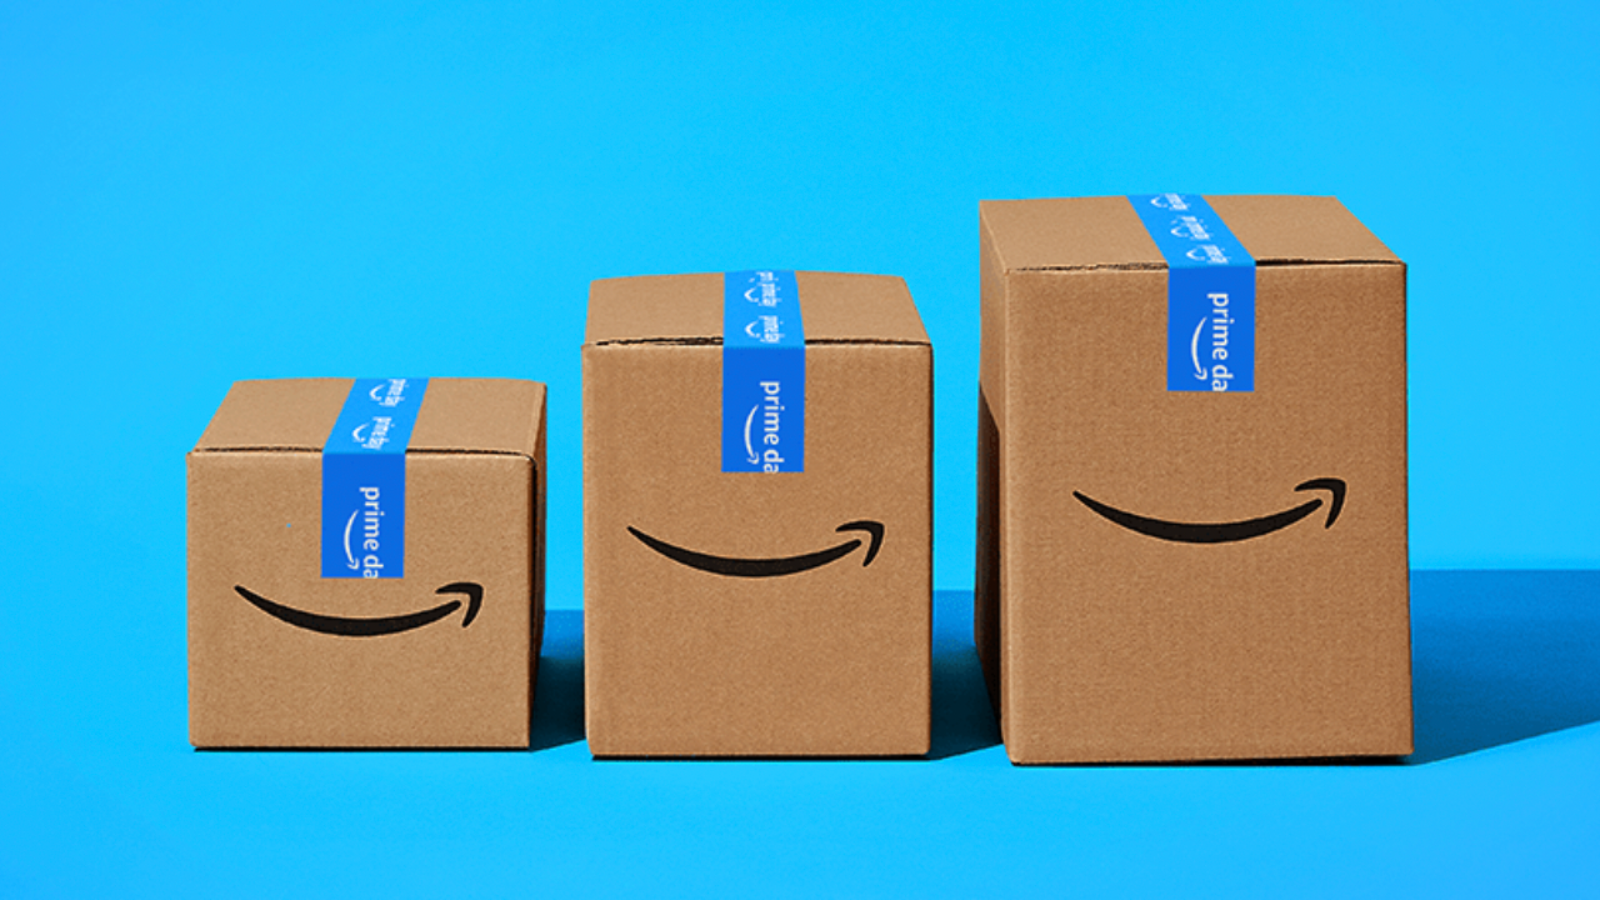 three amazon boxes lined up in order from smallest to largest against an aqua background